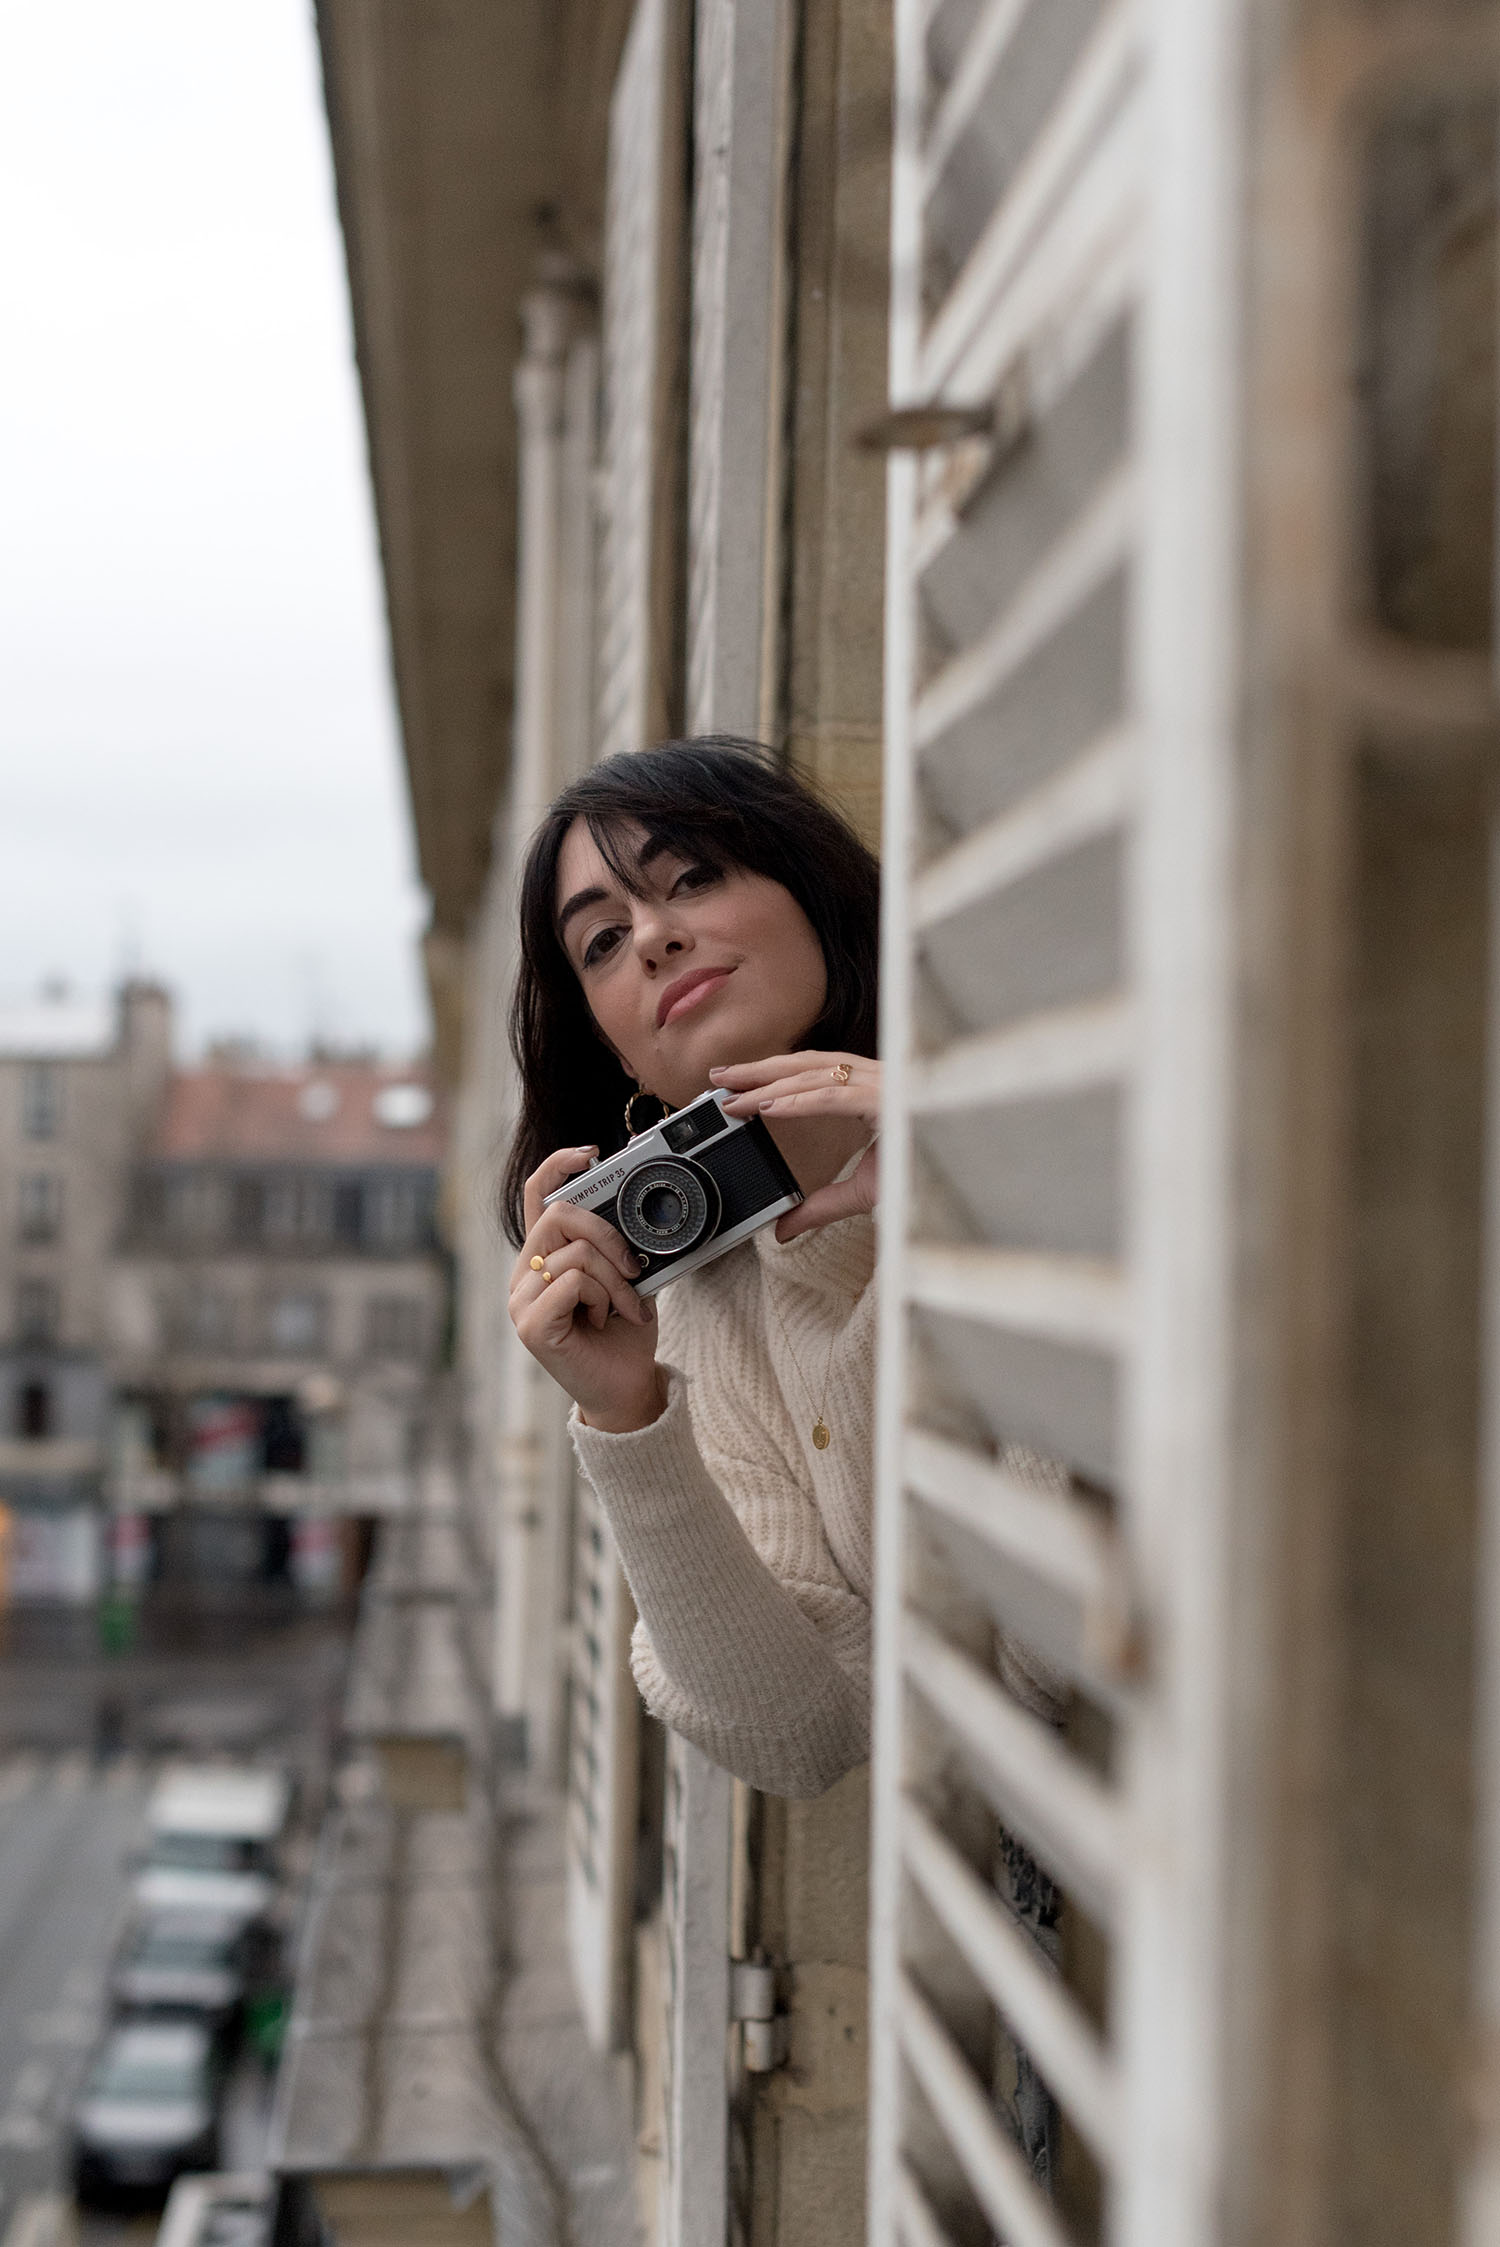 Top Winnipeg fashion blogger Cee Fardoe of Coco & Vera takes a photo out the window of a 14th arrondissement apartment in Paris, using an Olympus Trip camera